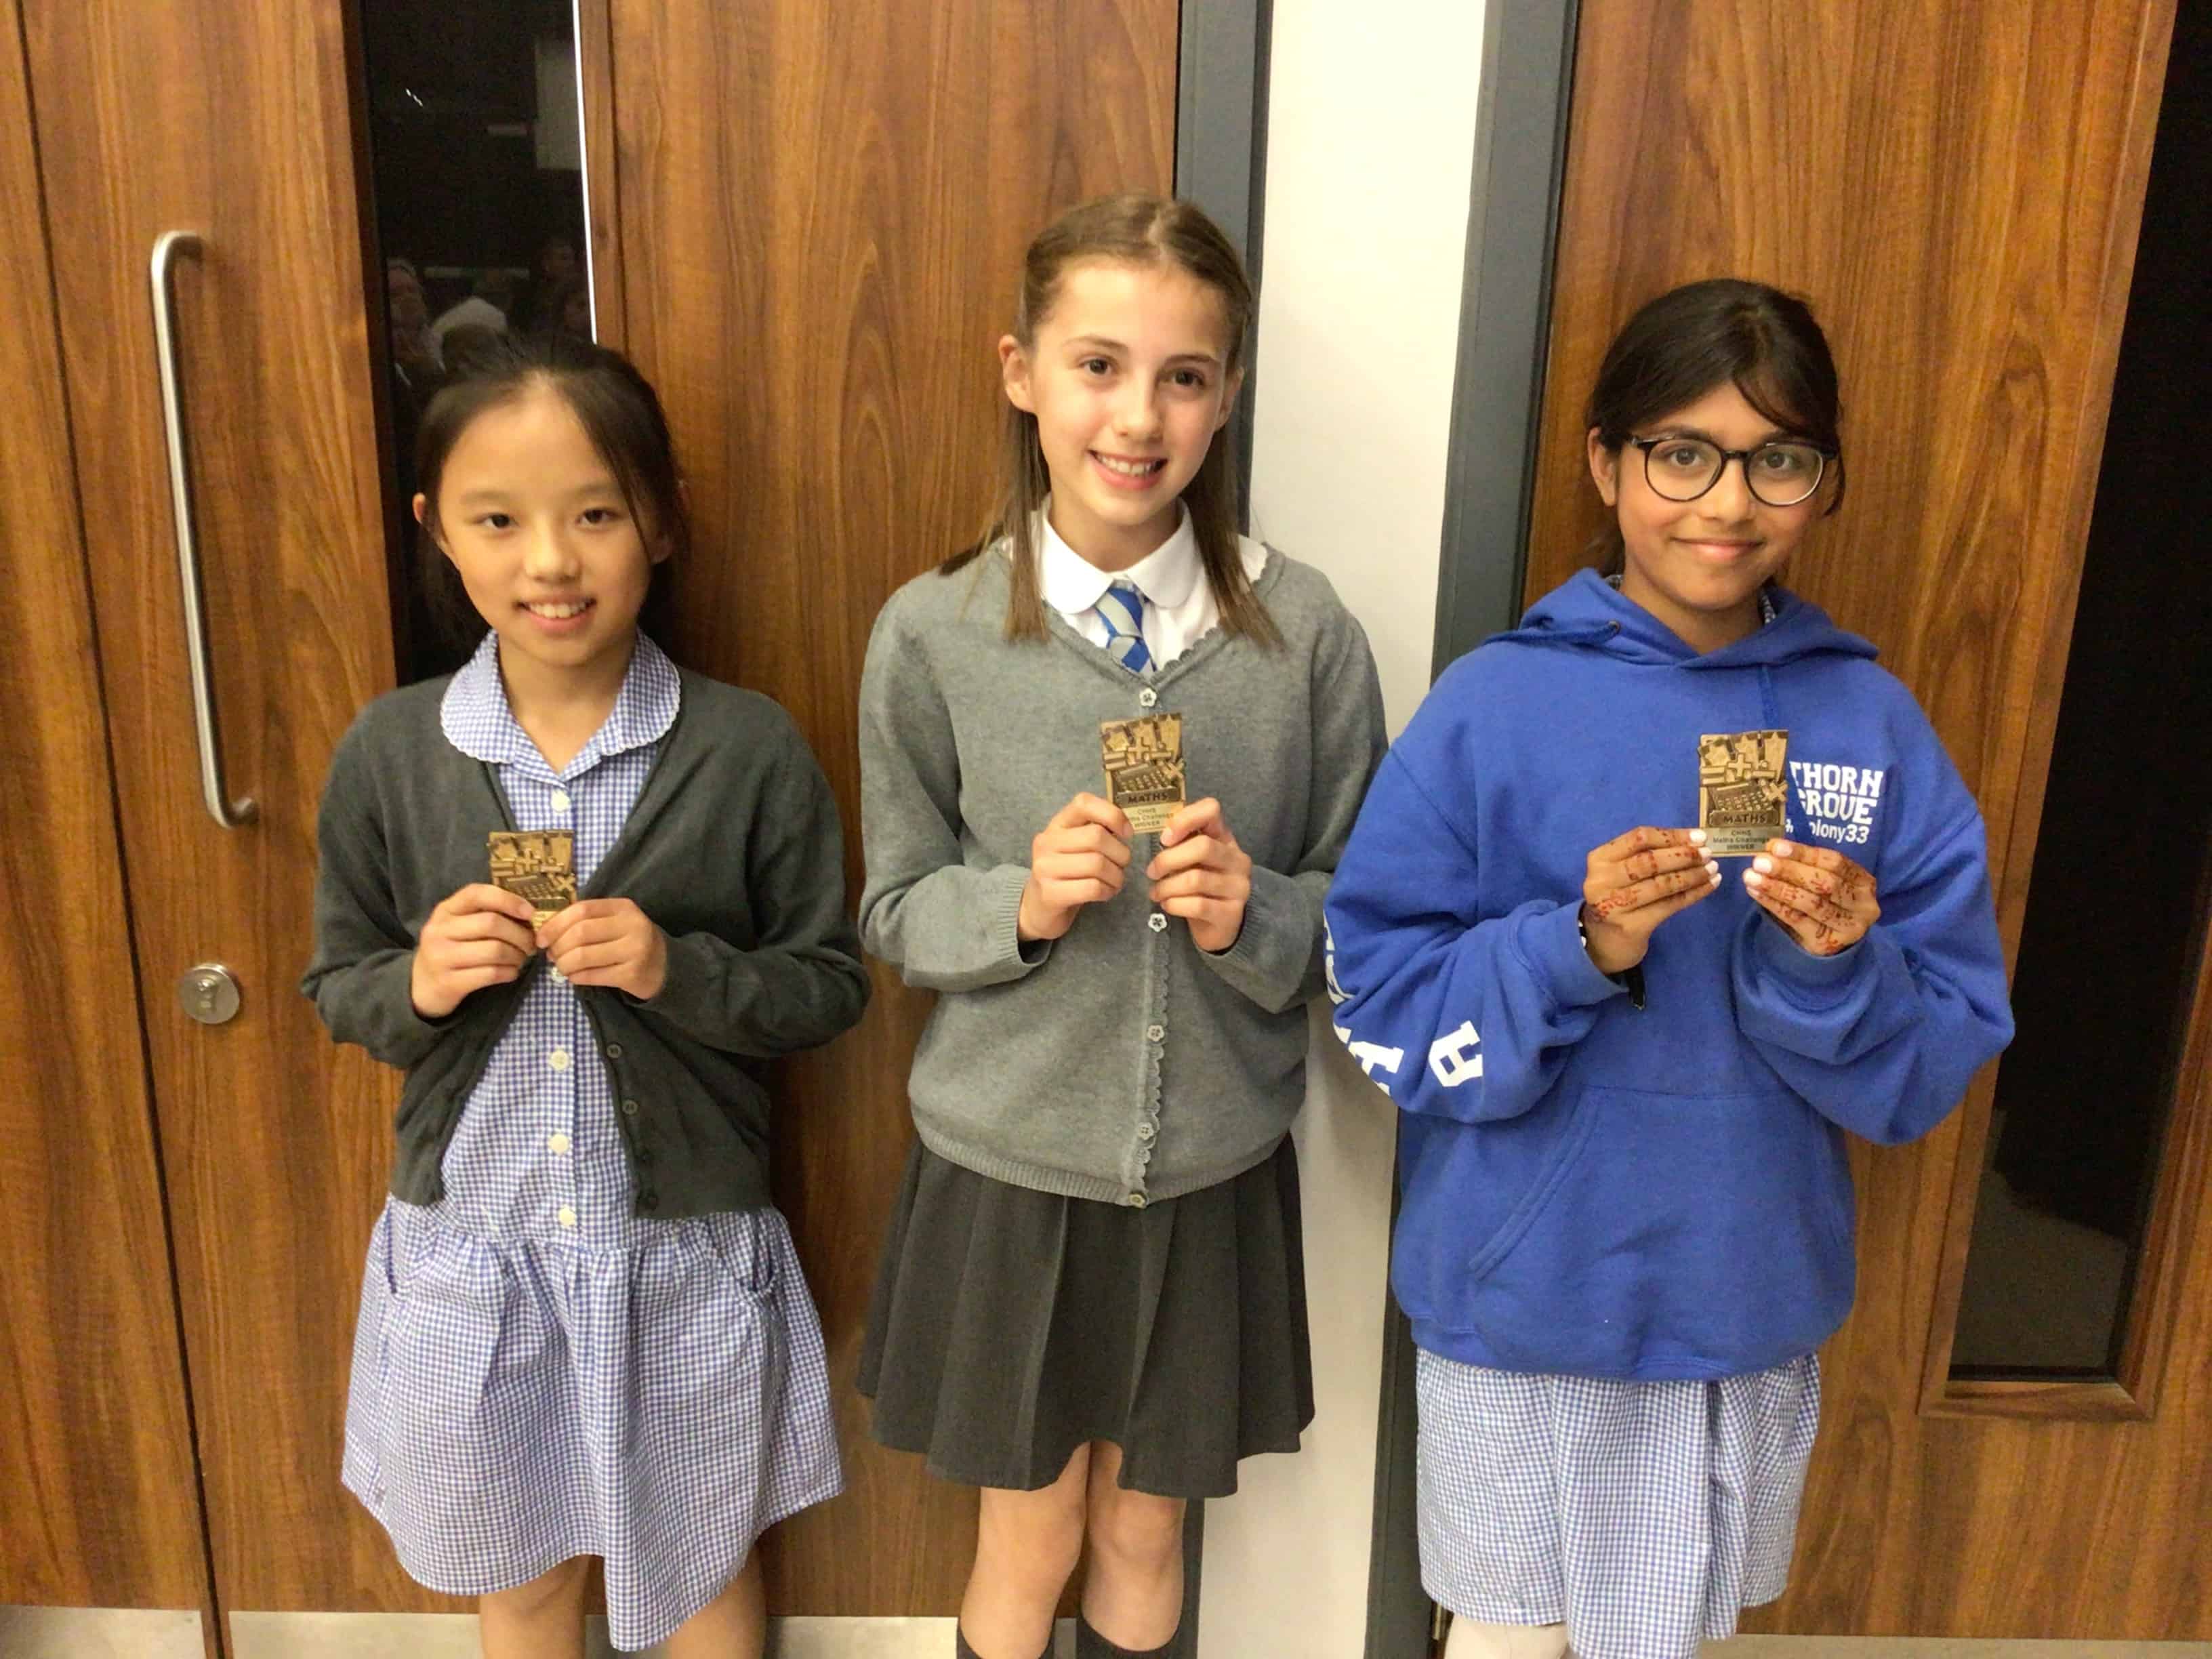 The winning pupils from Thorn Grove Primary School smile with their CHHS Maths Award magnets that they earned at the Cheadle Hulme High School Maths Award Evening.